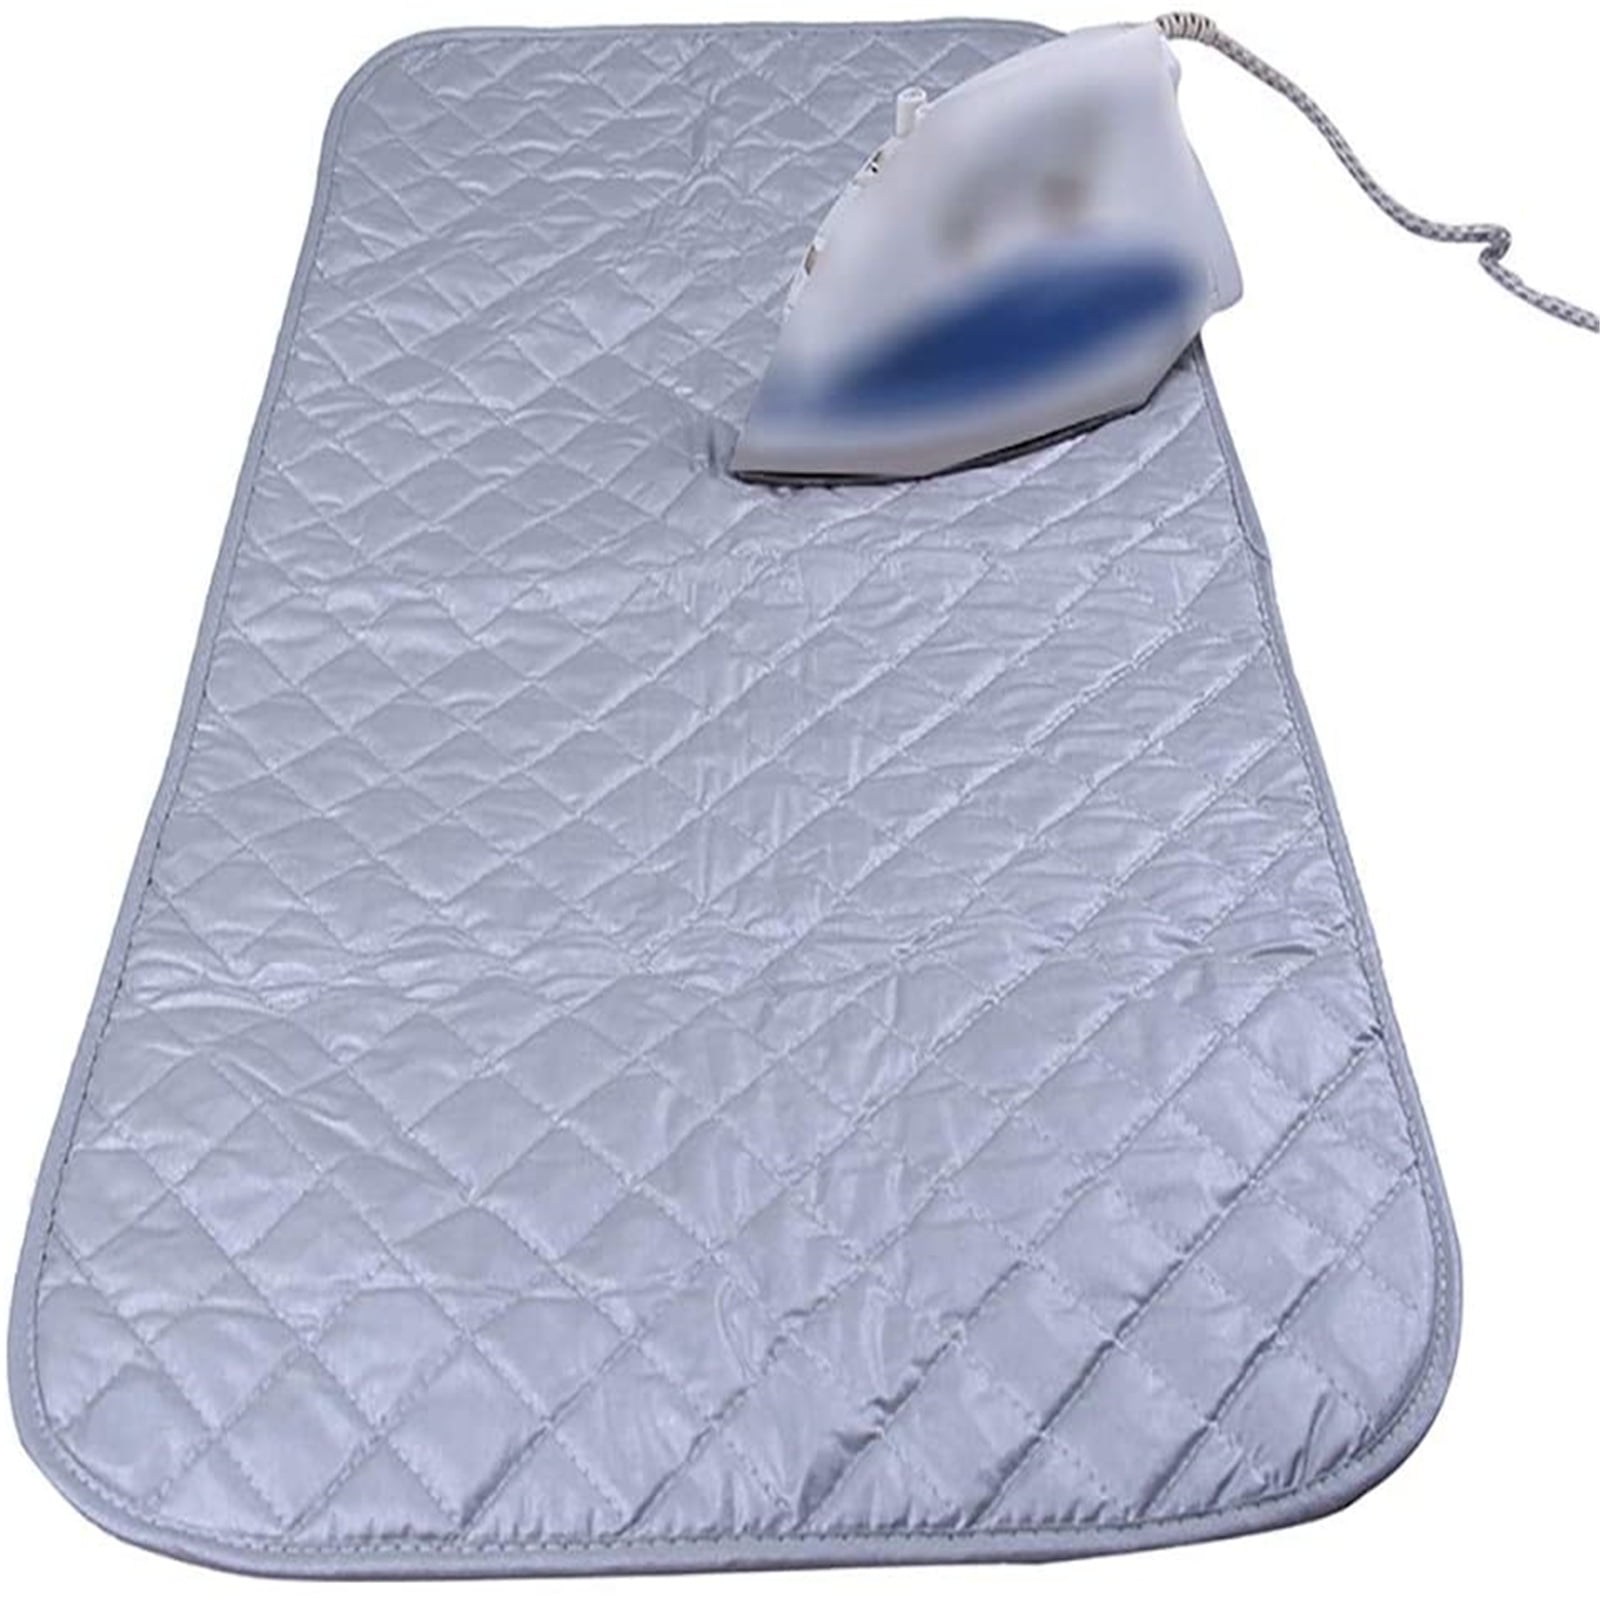 Evelots Ironing Blanket/Pad Magnetic-Heat Resistant Mat-Travel-33 Inch Long 